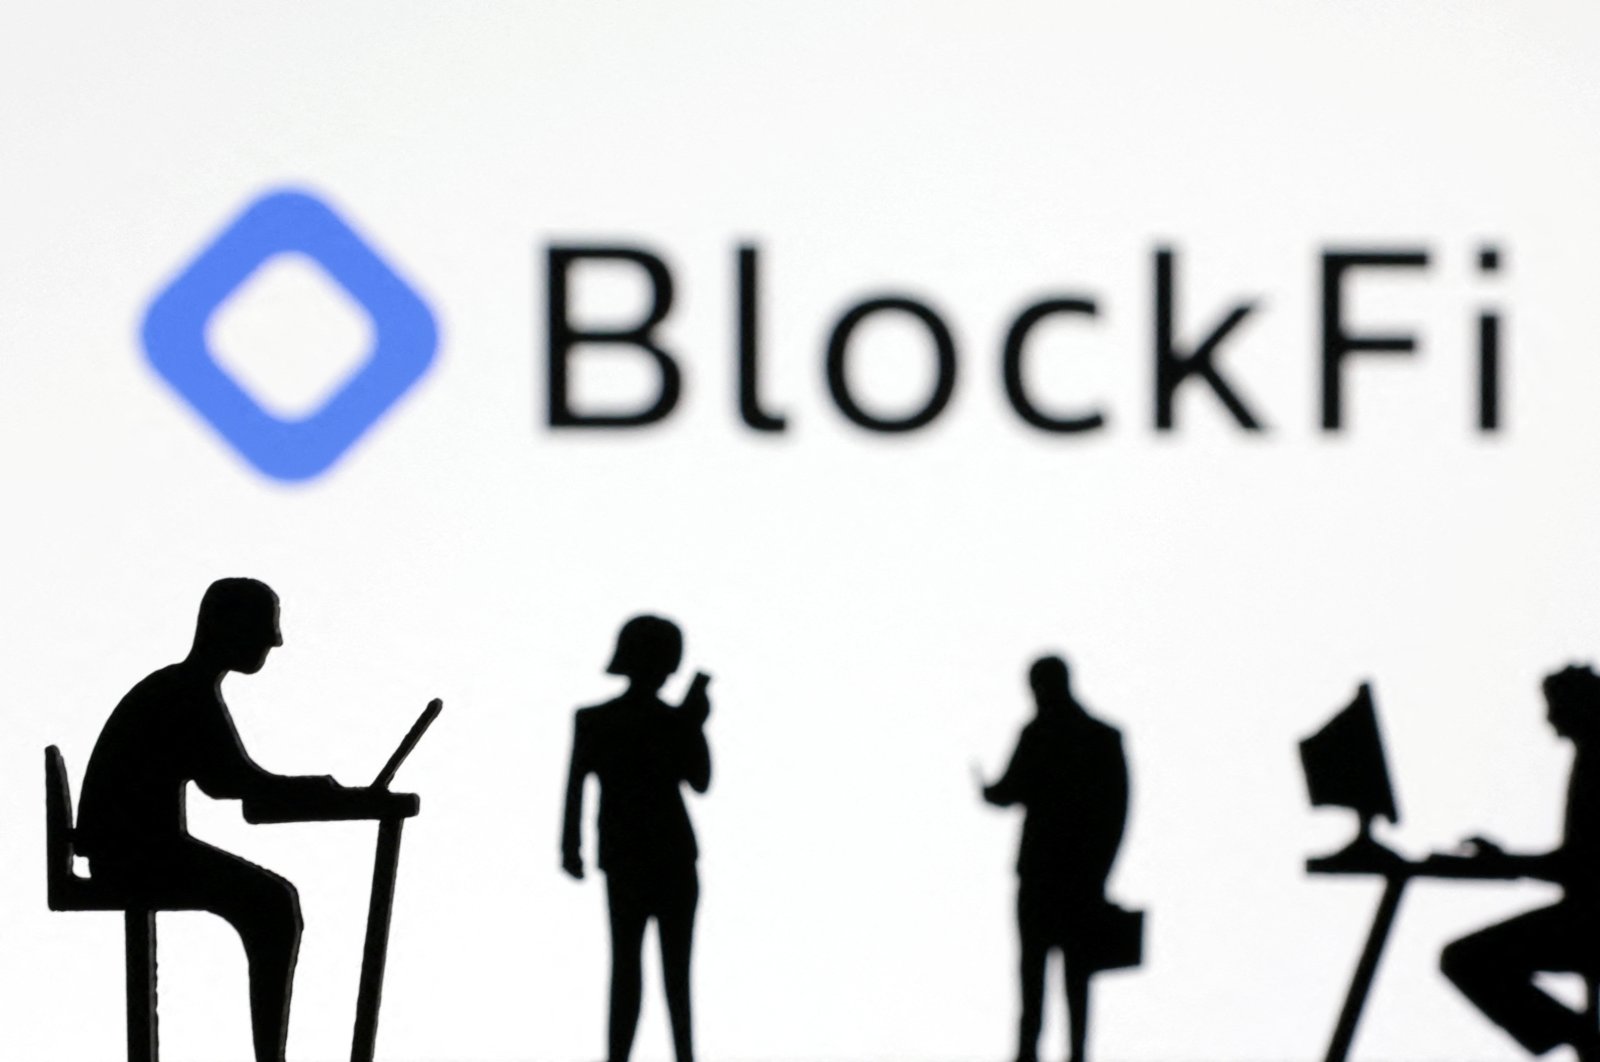 Figurines with smartphones and computers are seen in front of the BlockFi logo in this illustration, Nov. 28, 2022. (Reuters Photo)